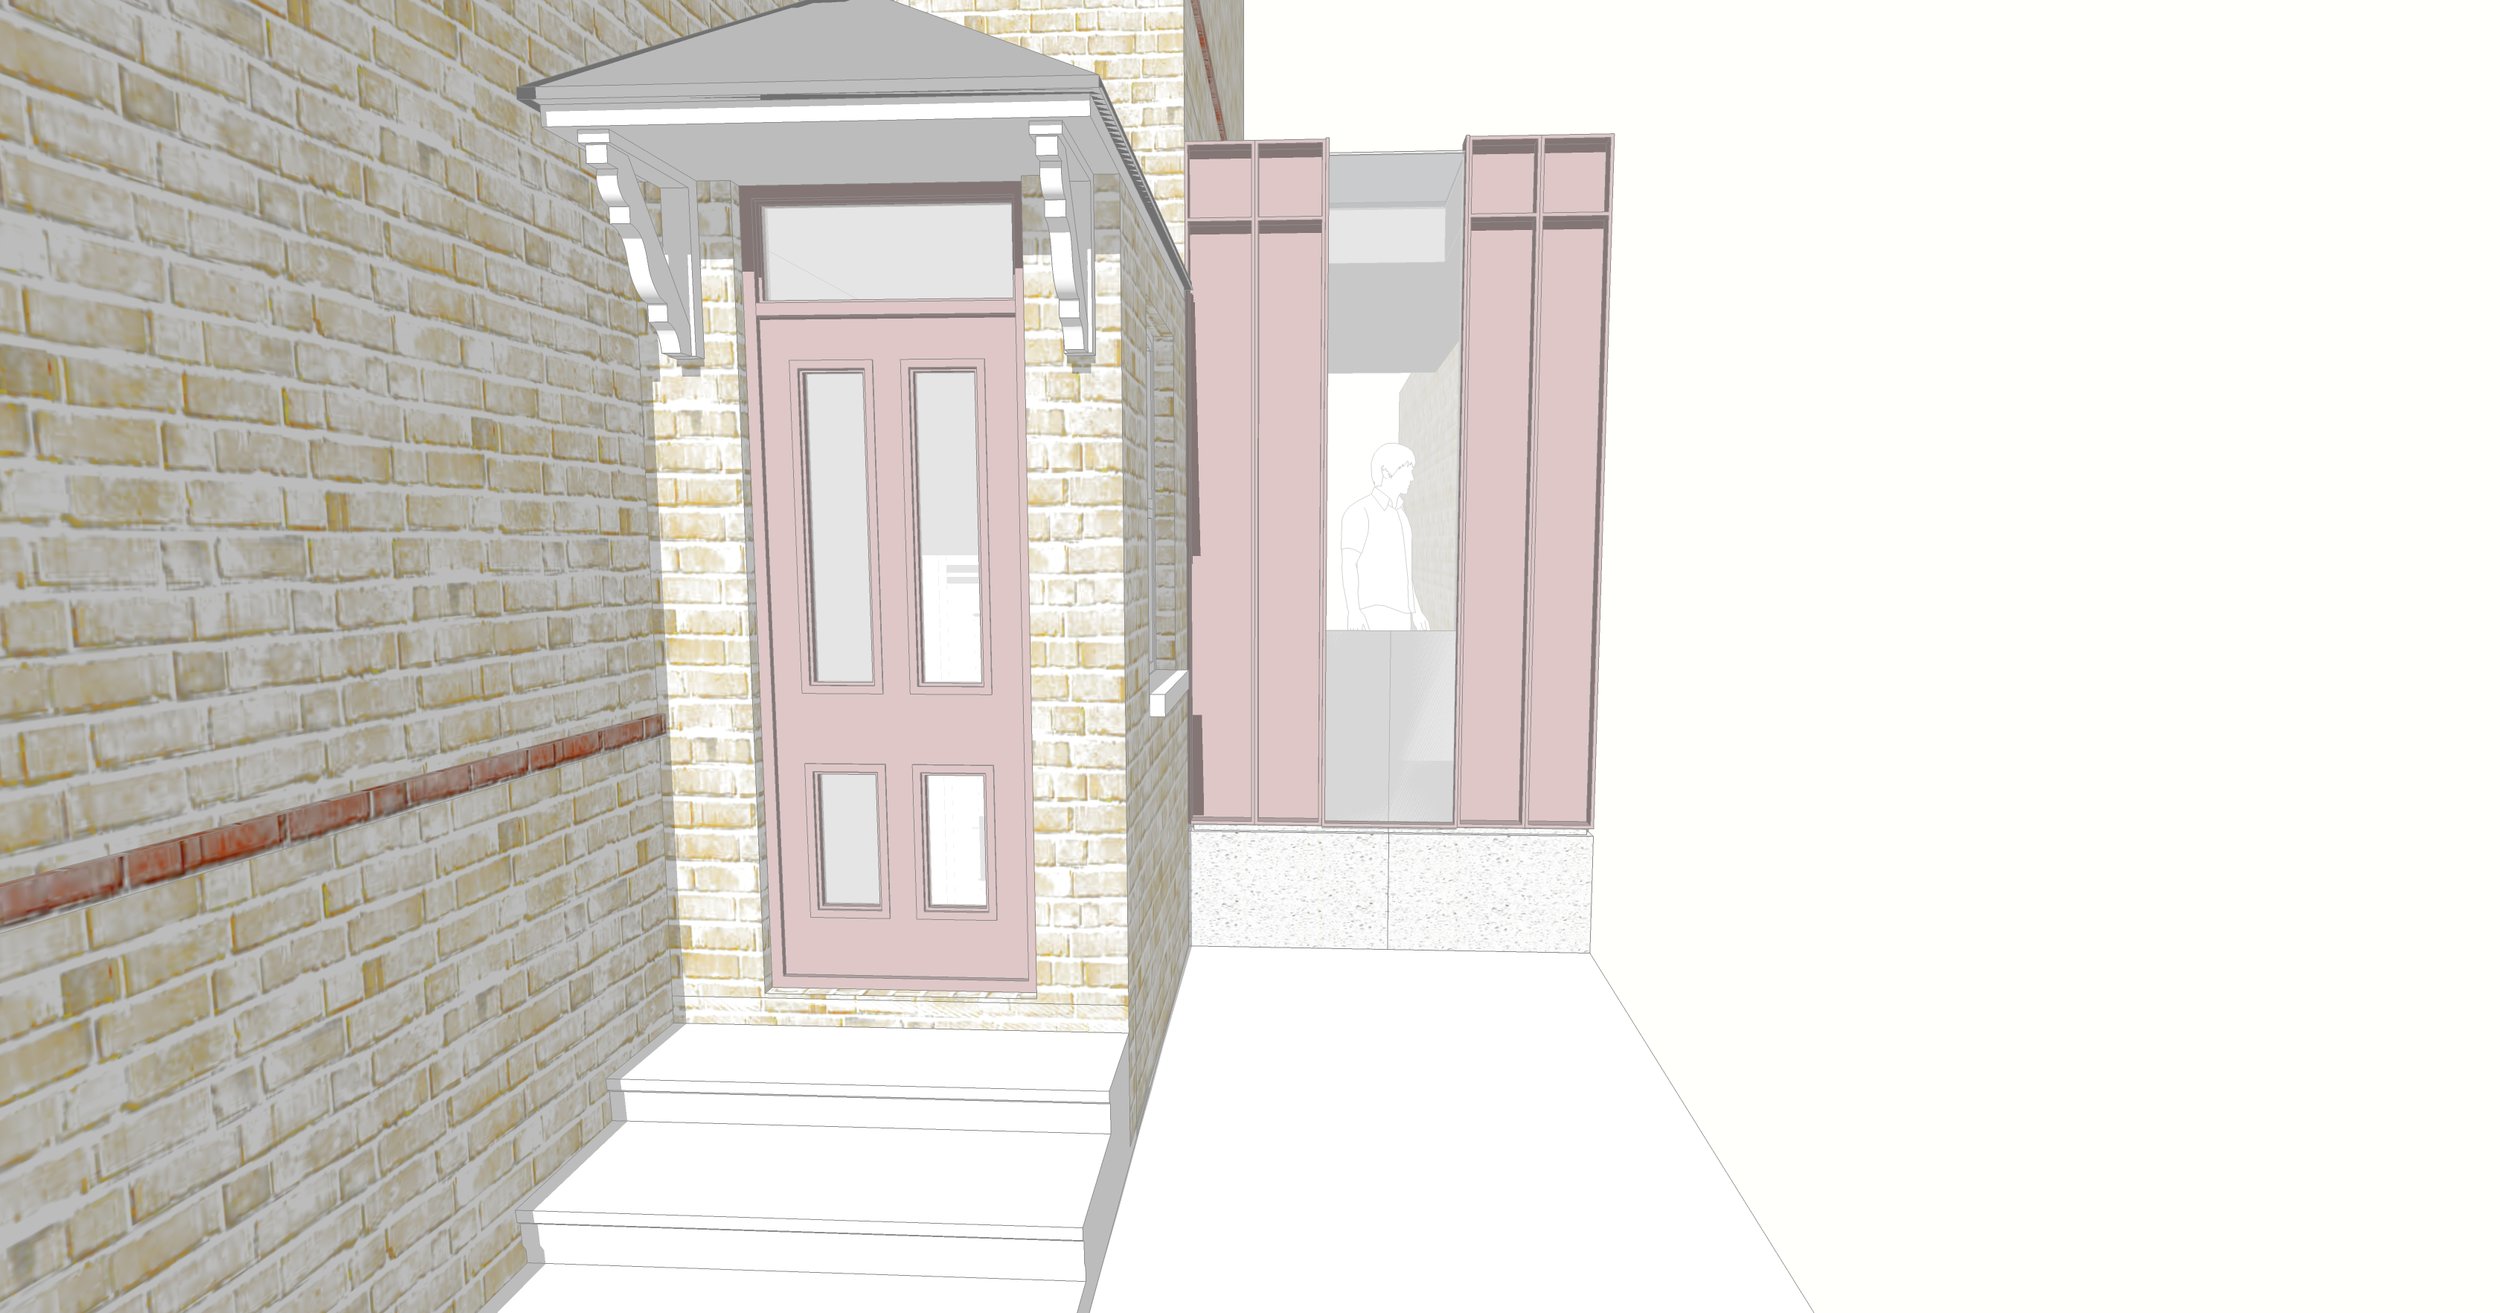 The Pink House extension planning permission